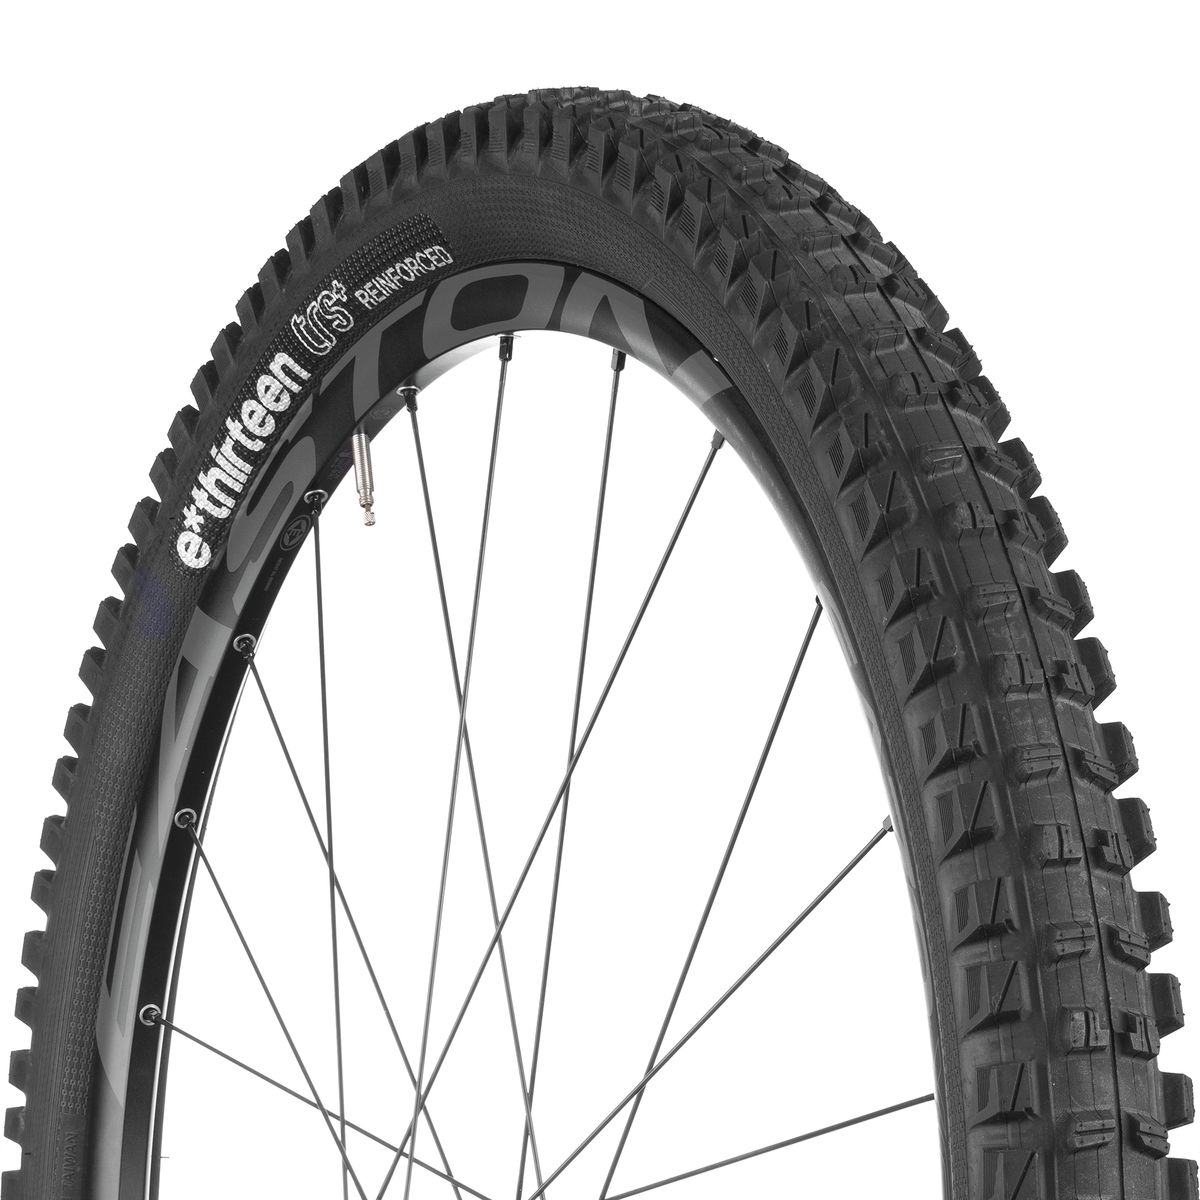 ethirteen components TRS Plus Tire 29in